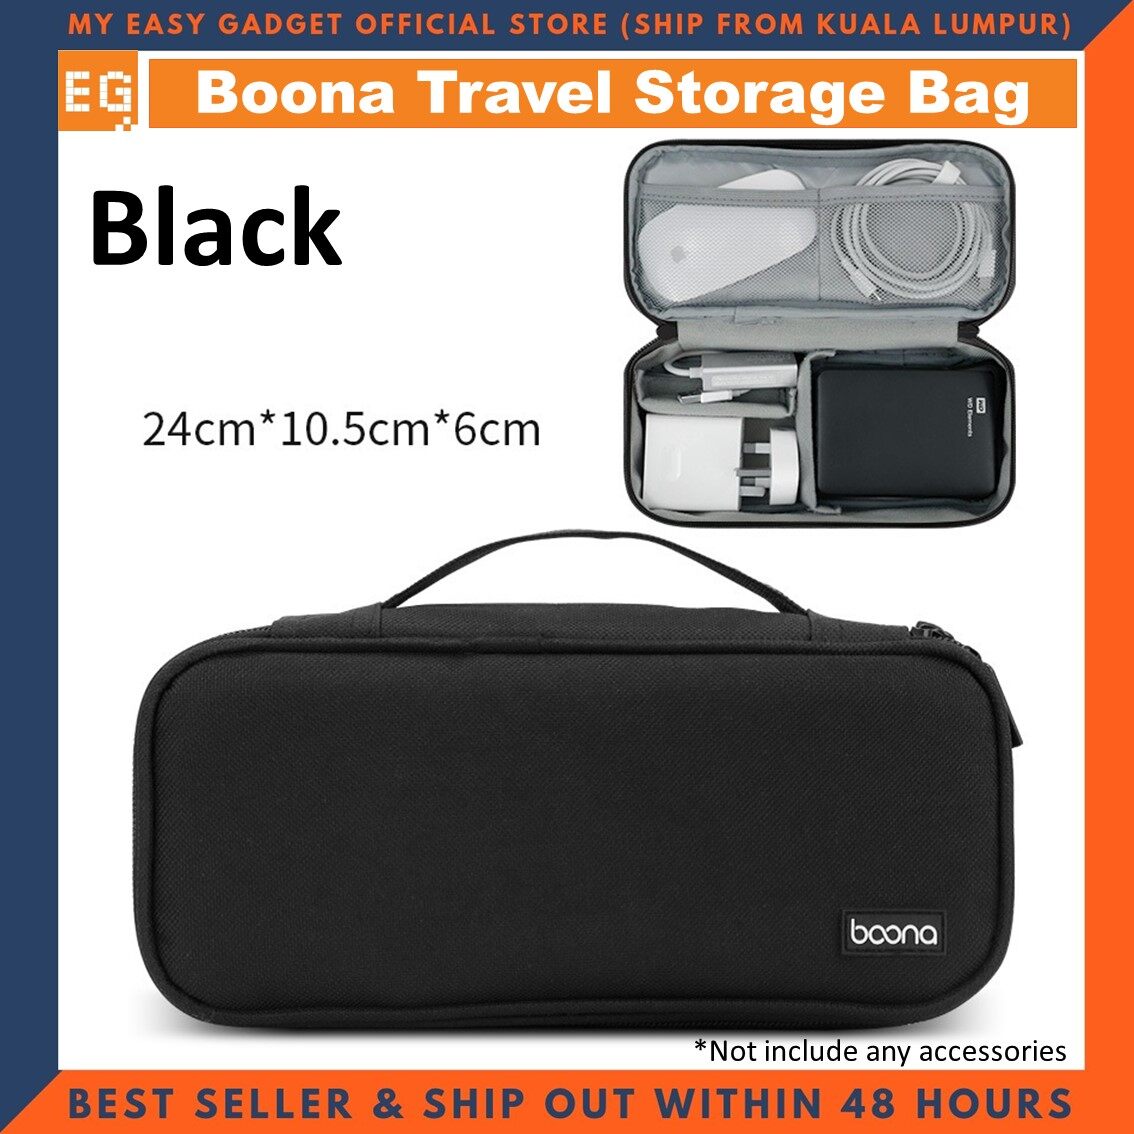 Boona Storage Bag Laptop Charger Bag Cable organizer External Hard Disk Case (Fit Power Bank, Mouse, Adapter)